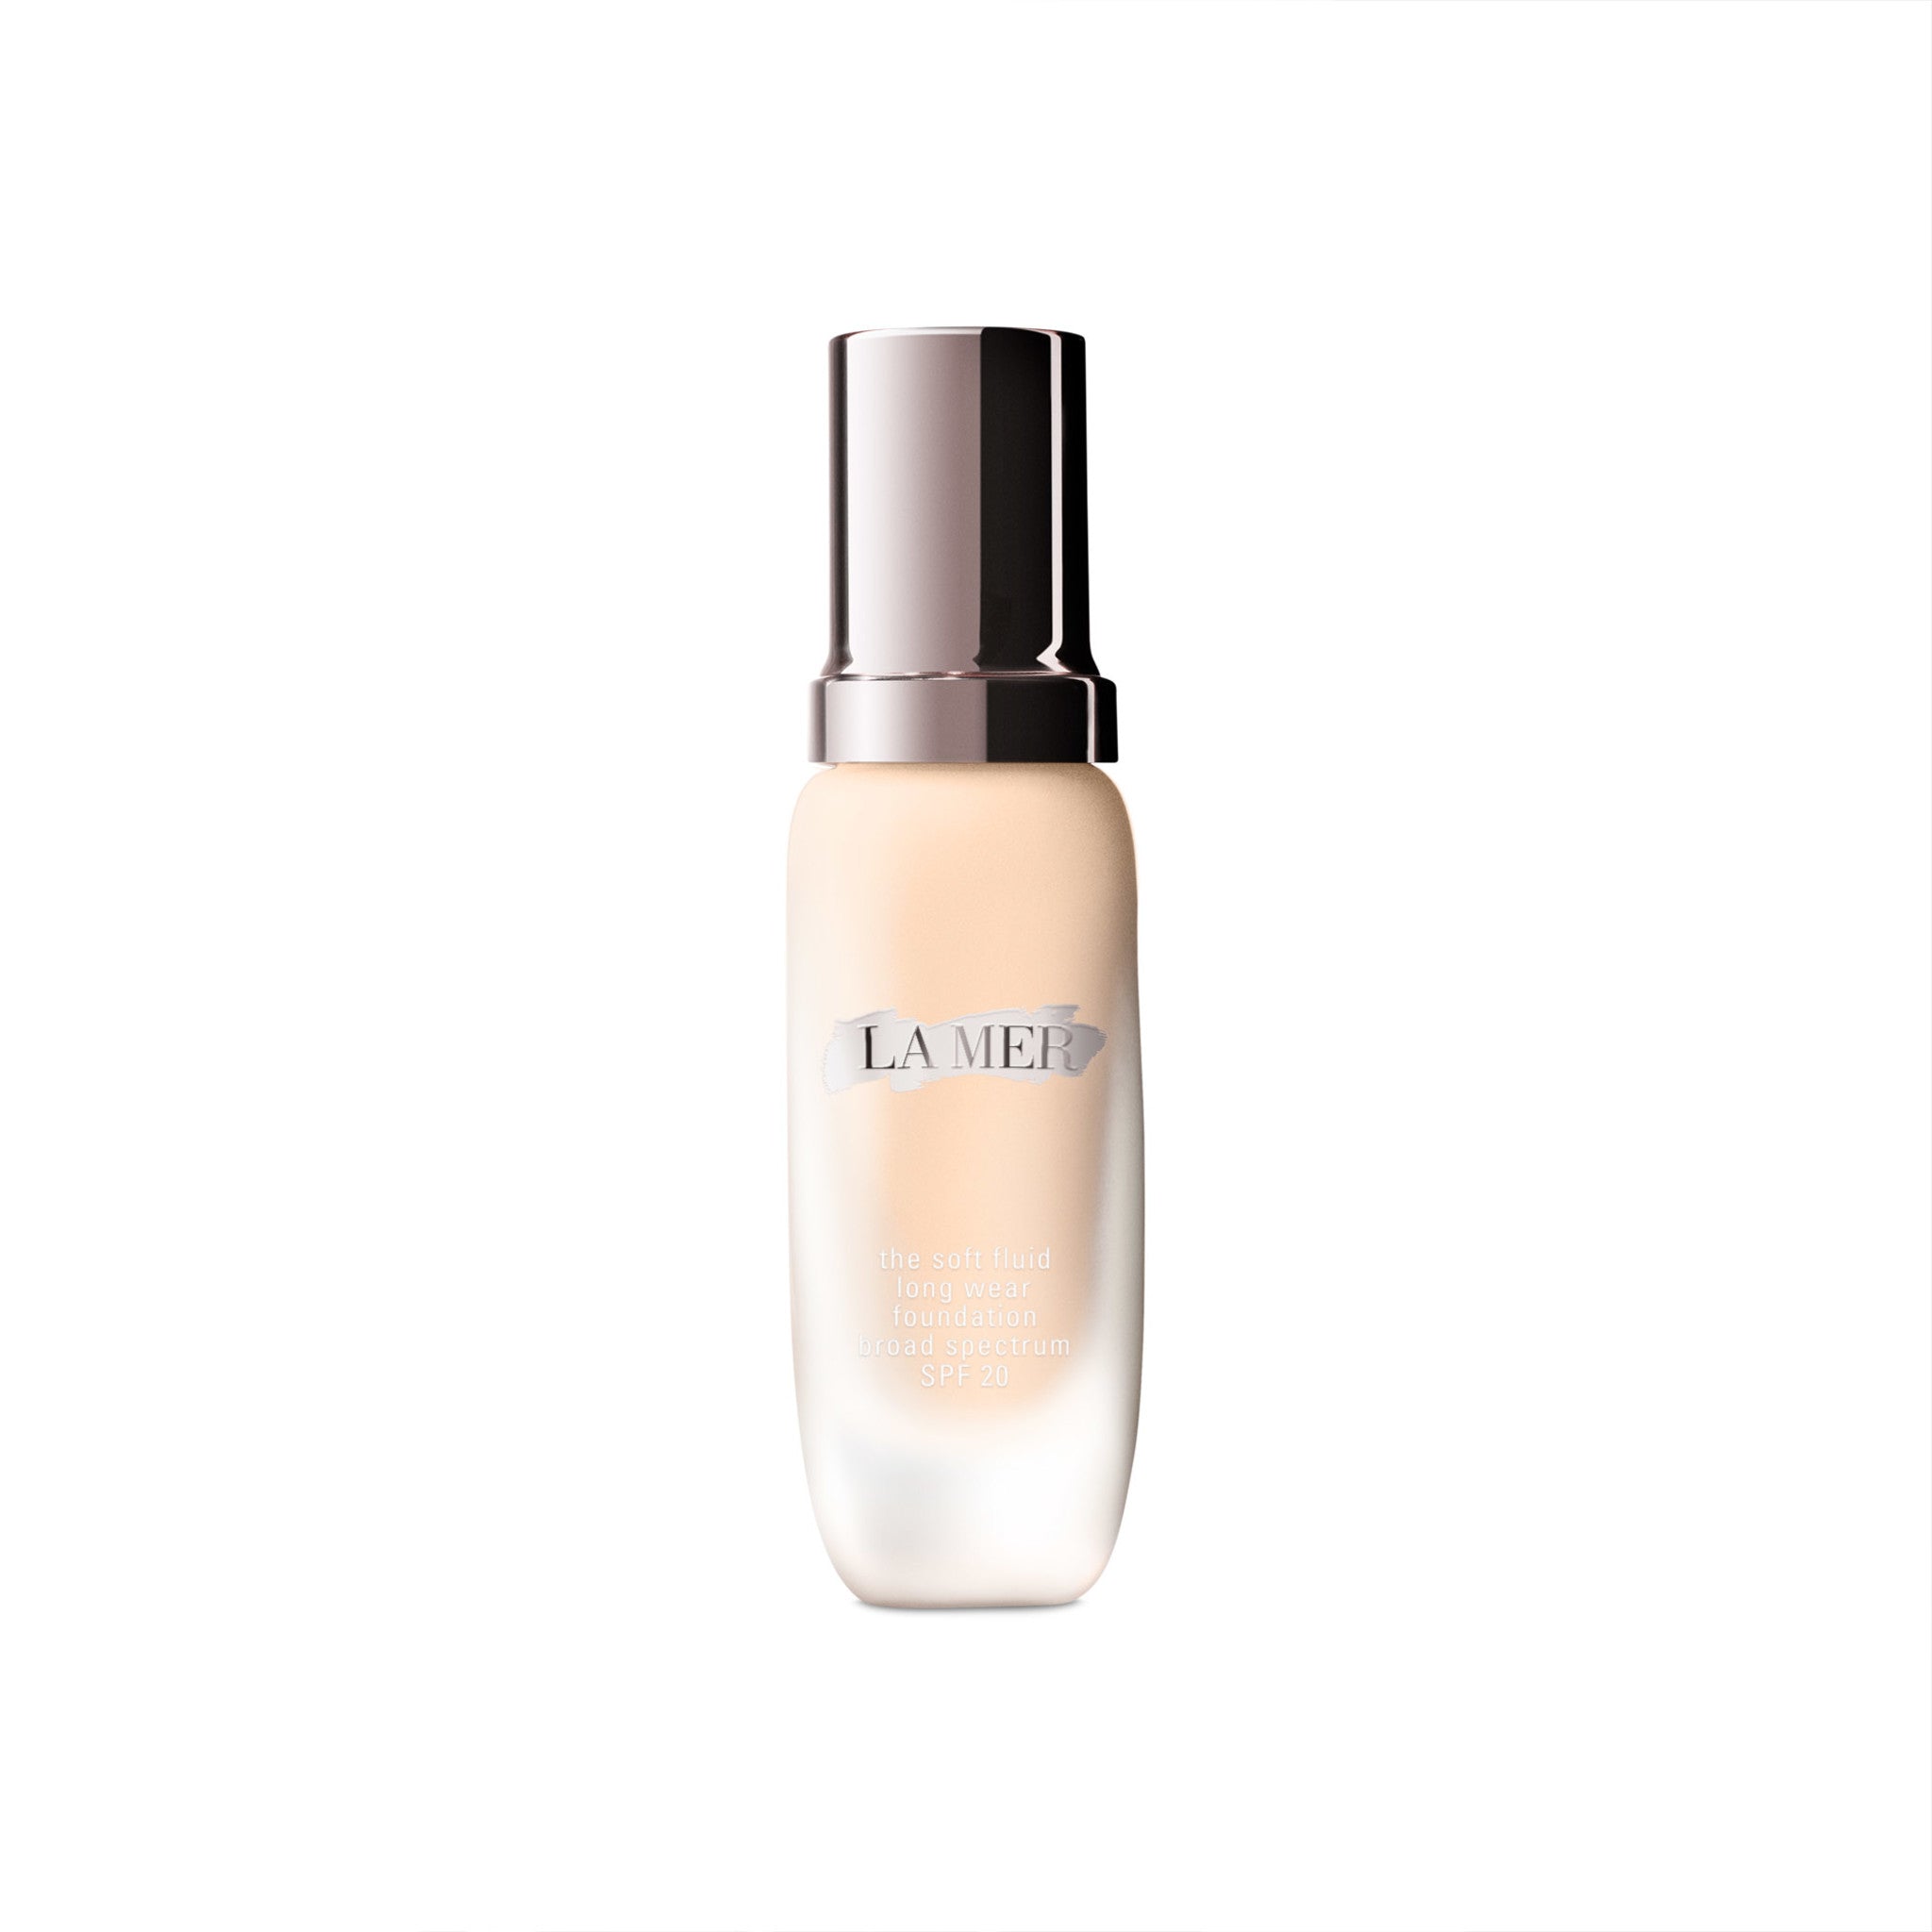 La Mer The Soft Fluid Long Wear Foundation SPF 20 Color/Shade variant: 130 Warm Ivory - Very Light Skin with Neutral Undertone main image. This product is for light complexions